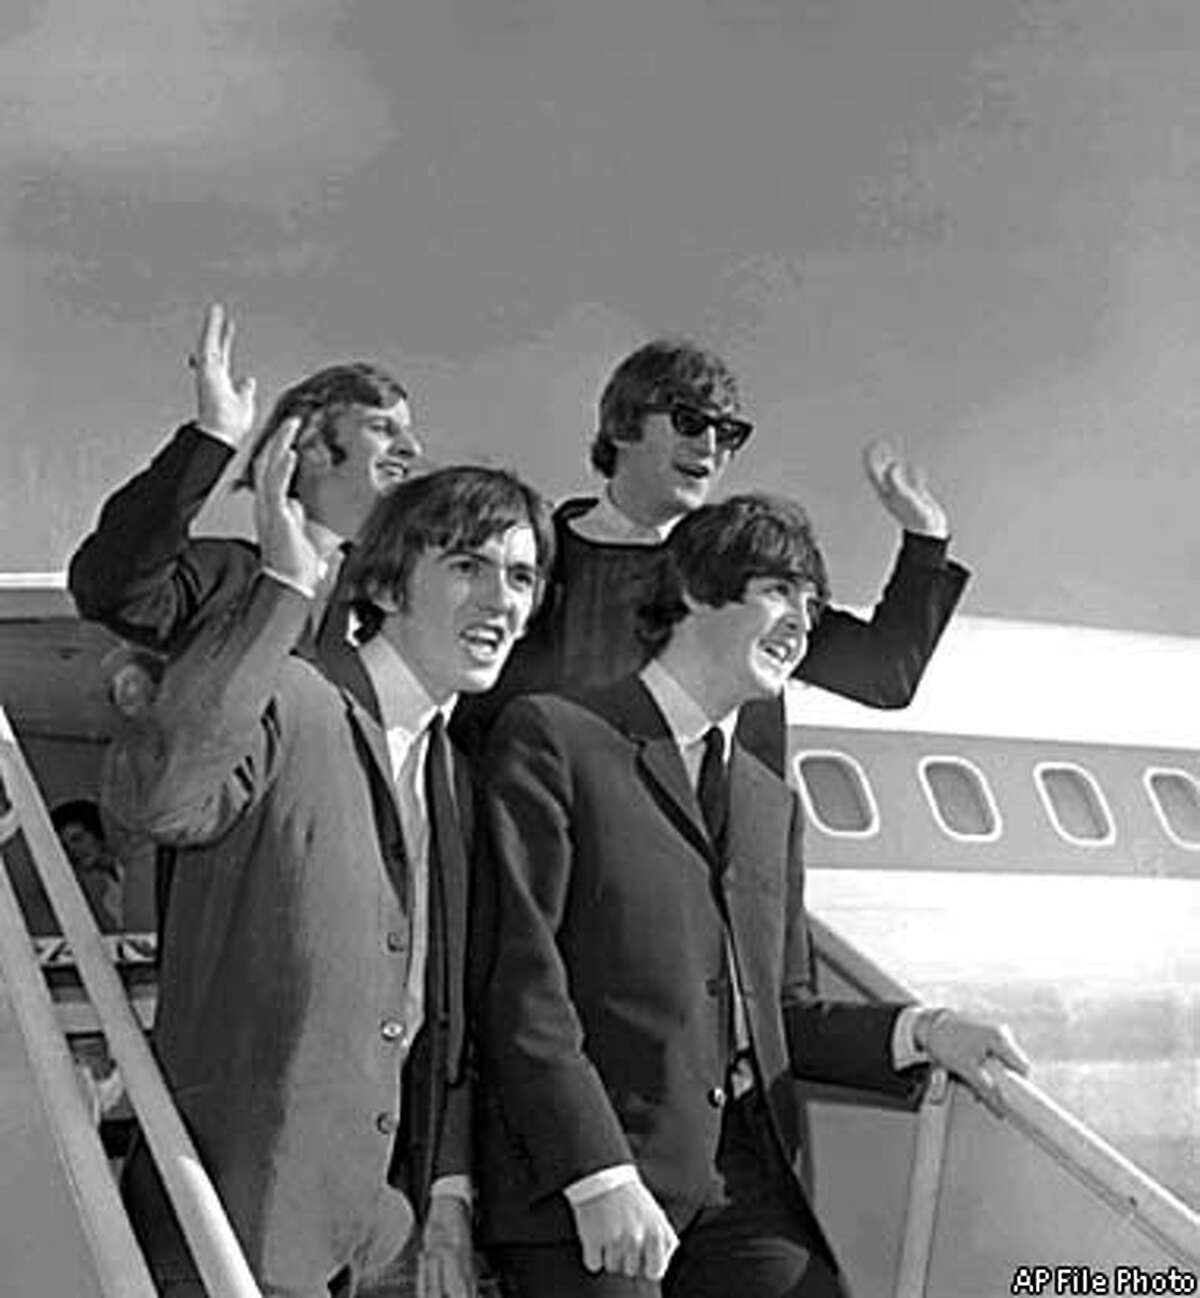 The Beatles arrived at San Francisco International Airport in August 1964 to begin an American tour at the Cow Palace. From left are Ringo Starr, George Harrison, John Lennon and Paul McCartney. Associated Press File Photo